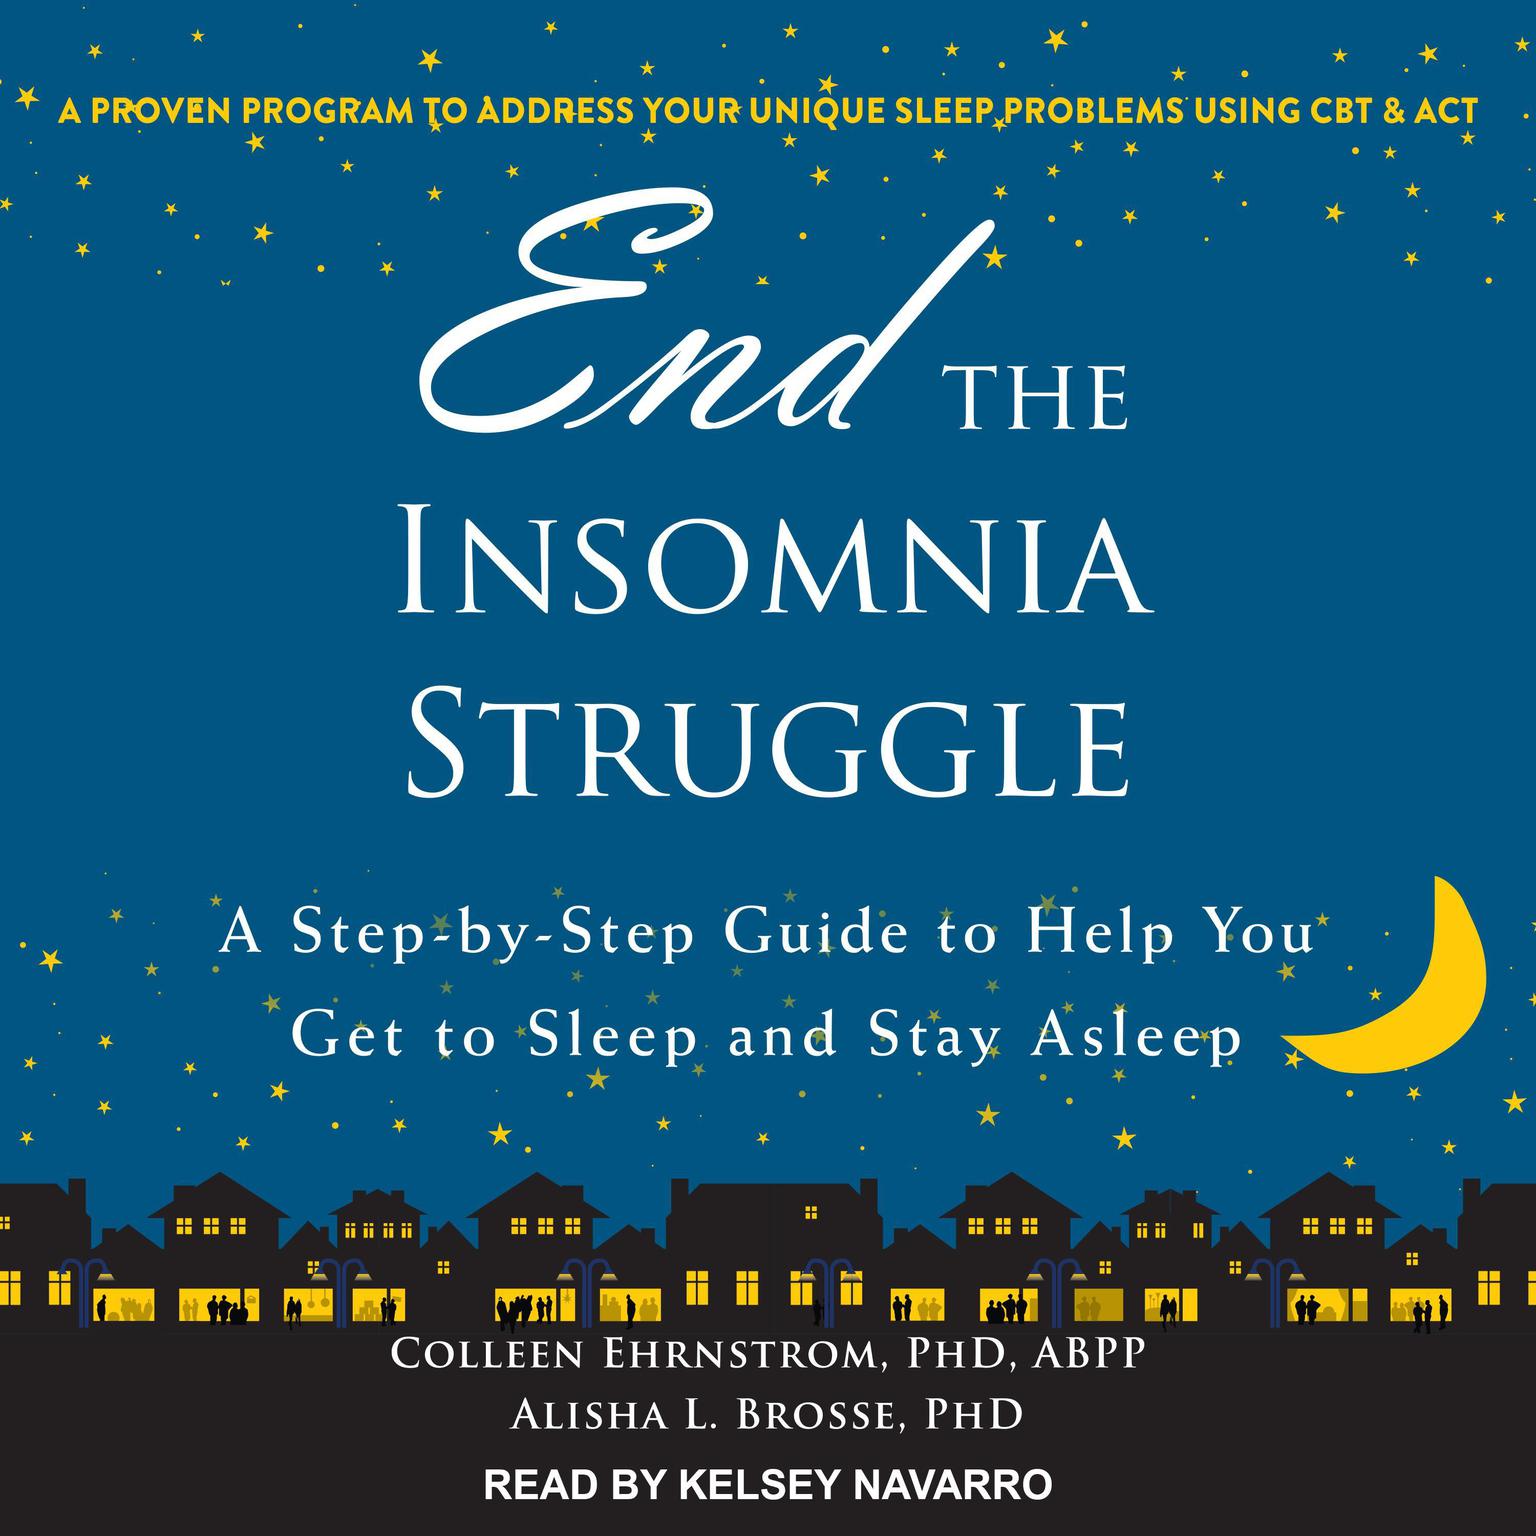 End the Insomnia Struggle: A Step-by-Step Guide to Help You Get to Sleep and Stay Asleep Audiobook, by Alisha L. Brosse